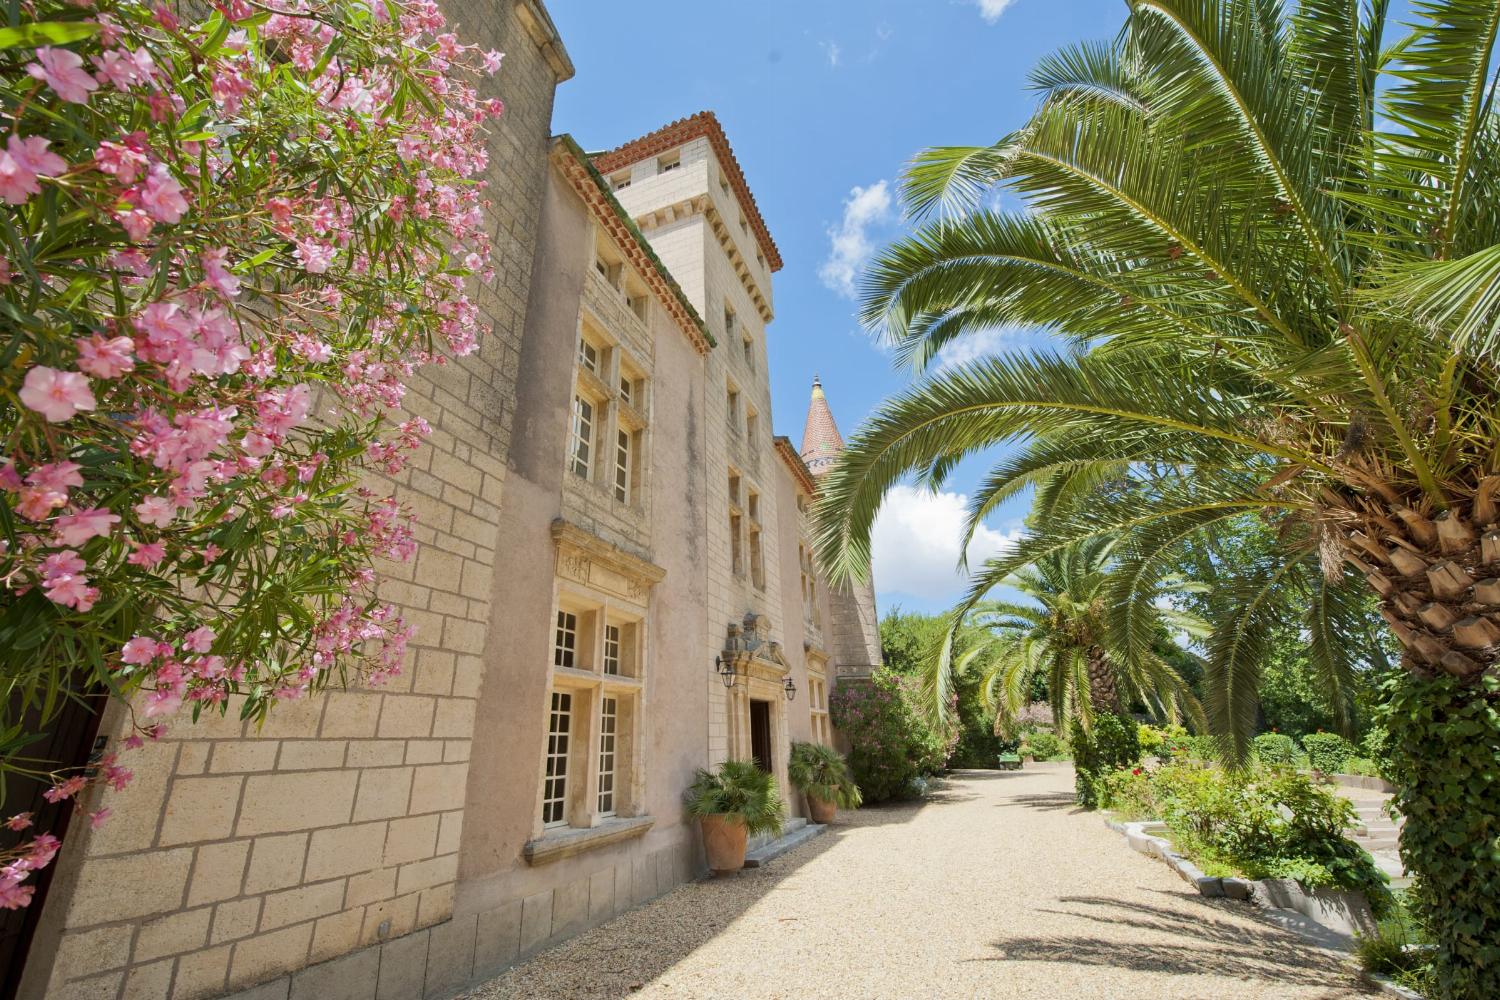 Holiday château in the South of France